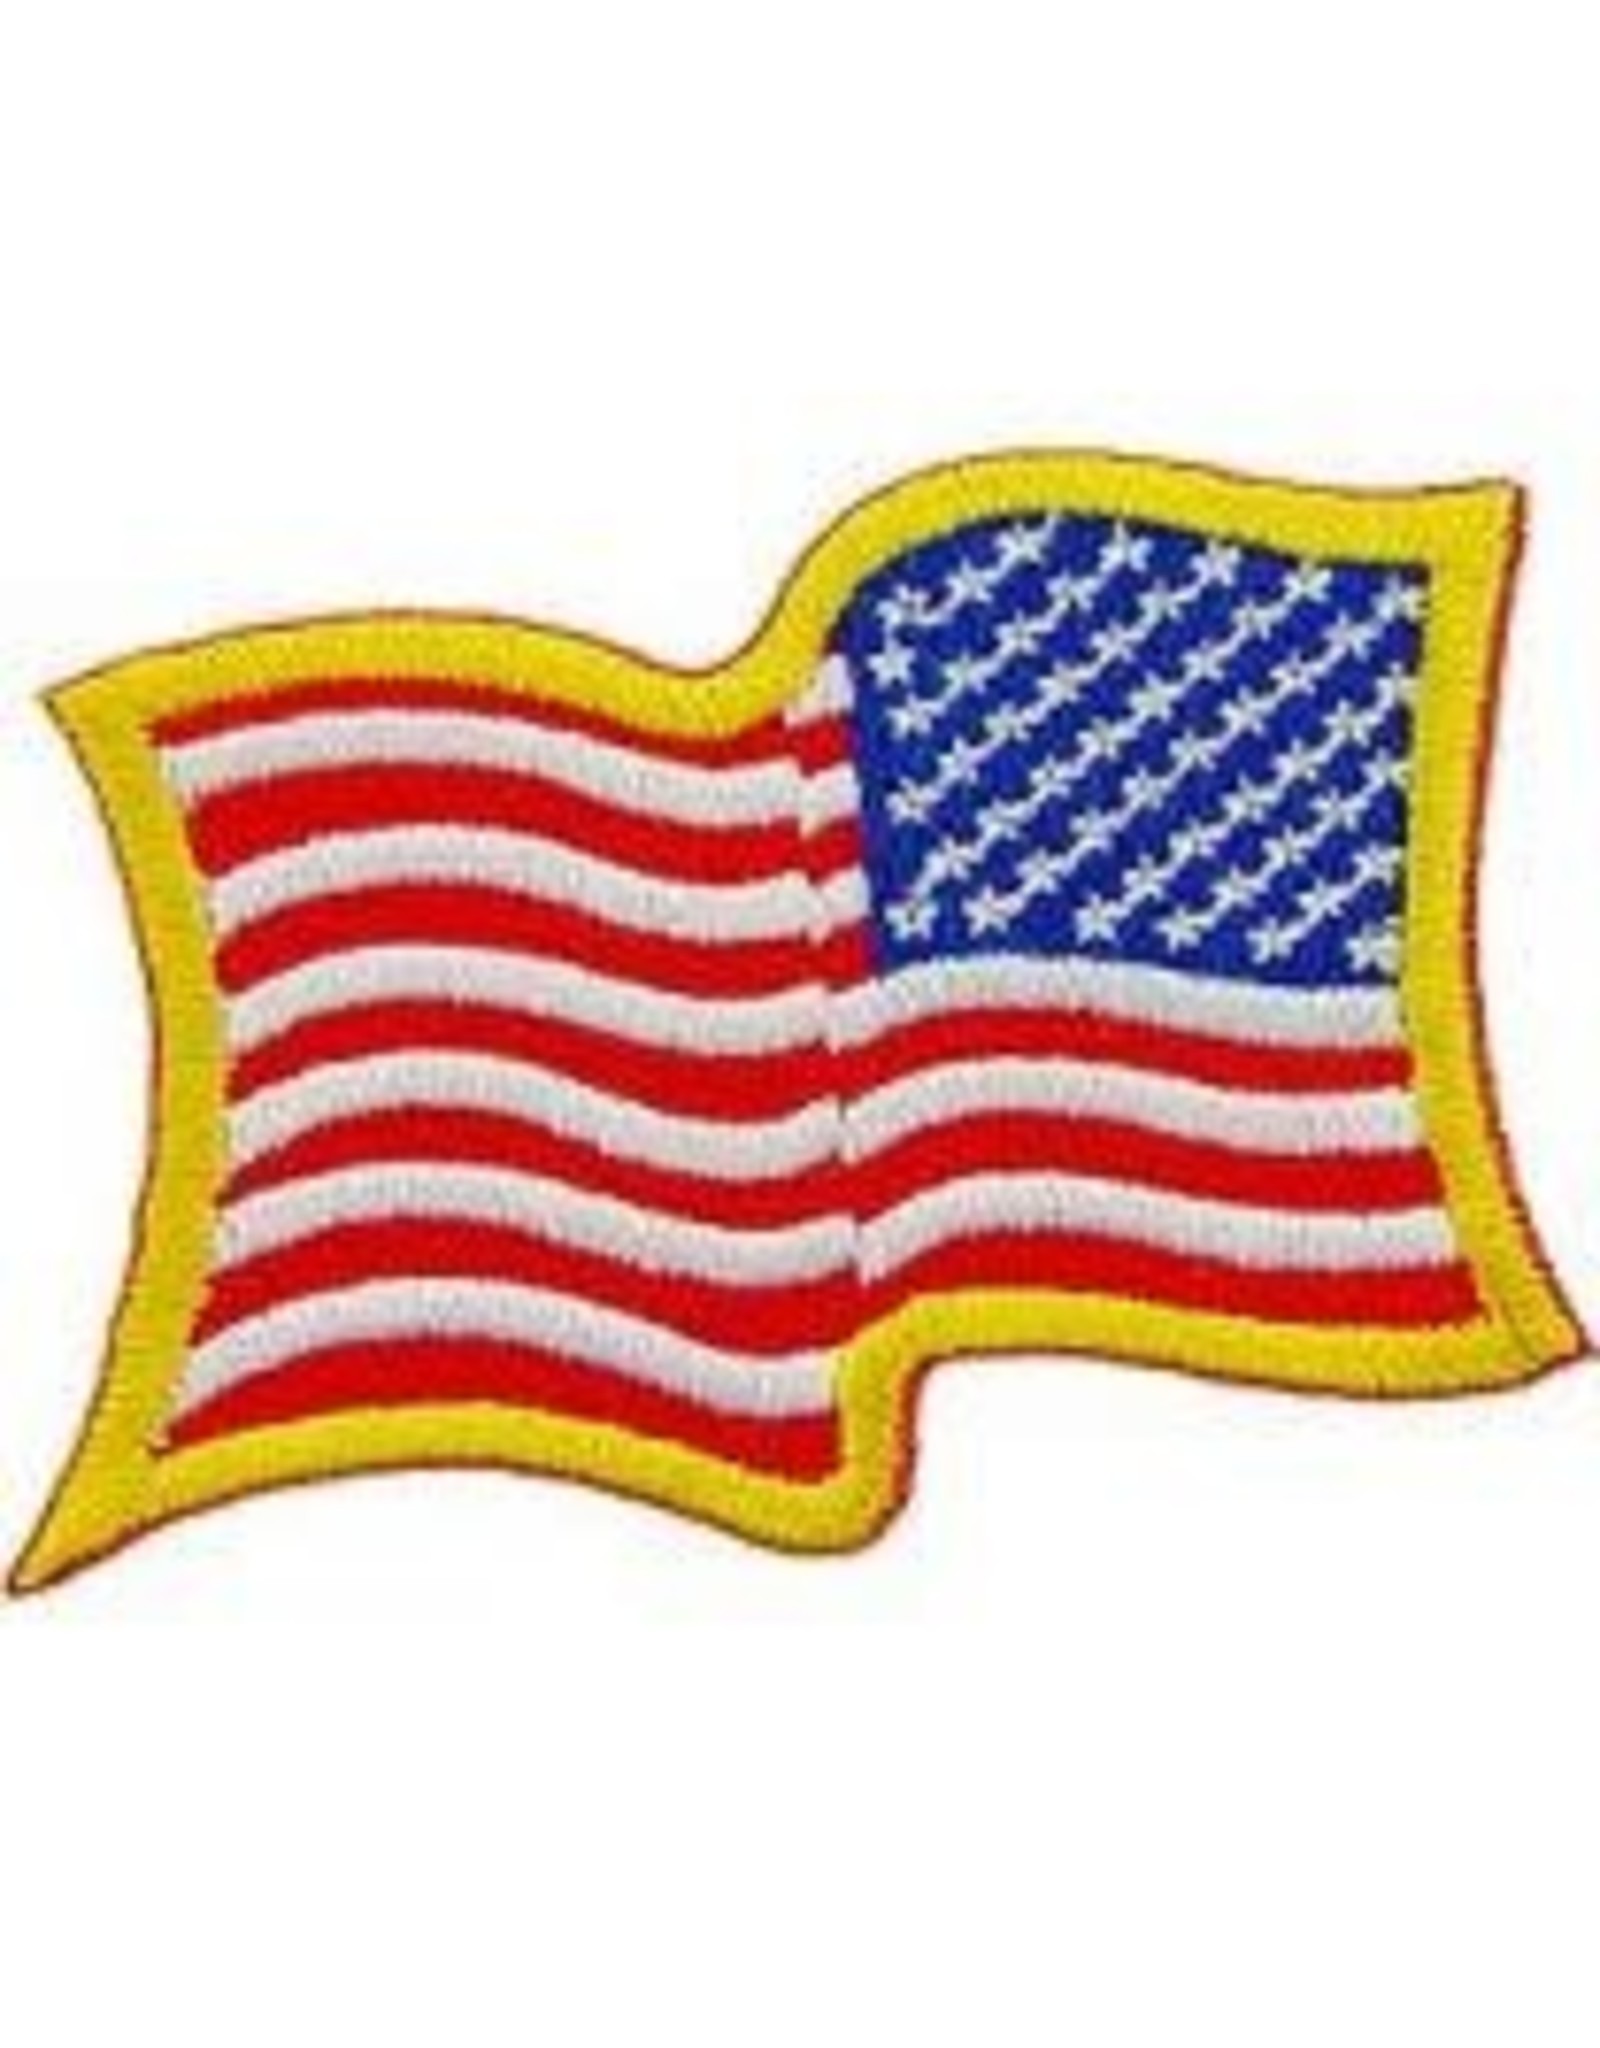 Patch - Flag USA Wavy Gold Reverse